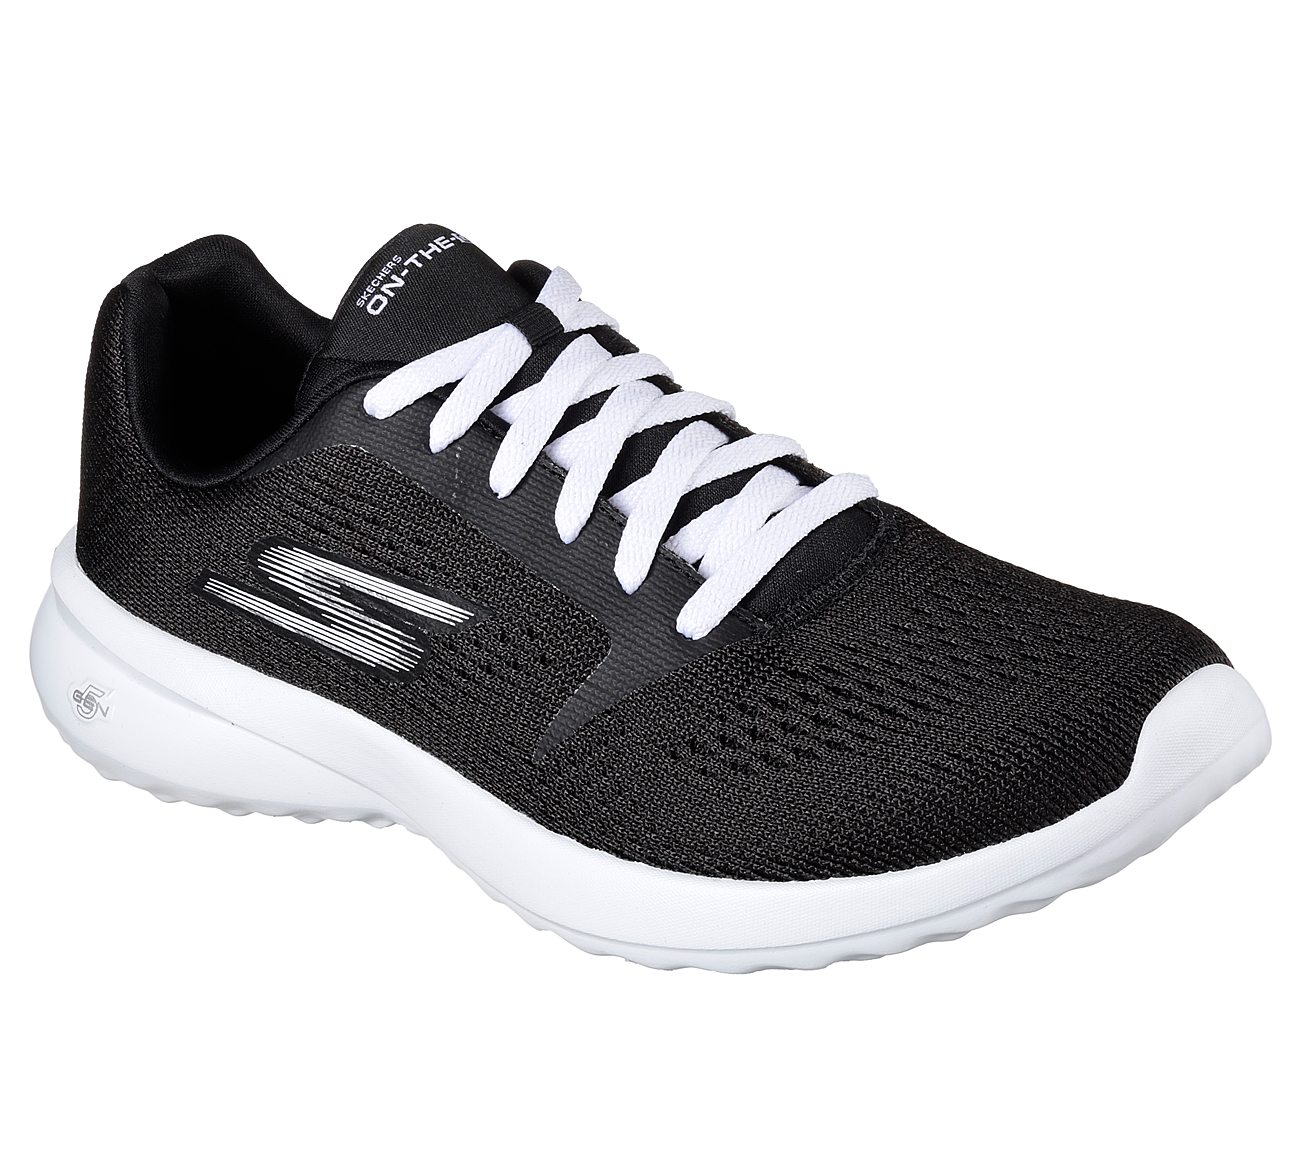 Driven Skechers Performance Shoes